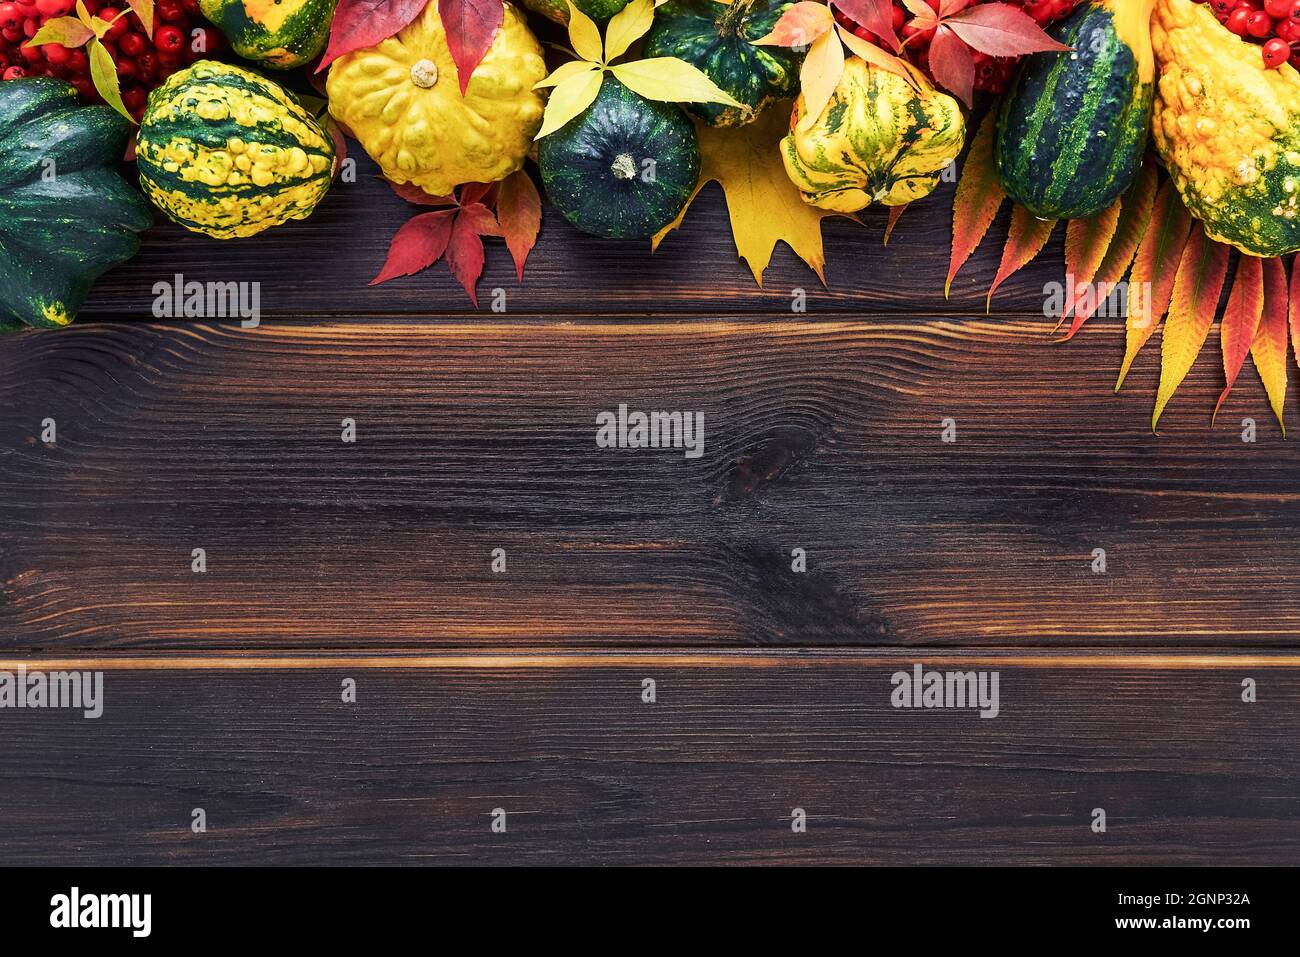 Autumn background with pumpkins, fallen colorful leaves on a dark wooden table. Happy Thanksgiving concept. Flat lay, copy space for text Stock Photo